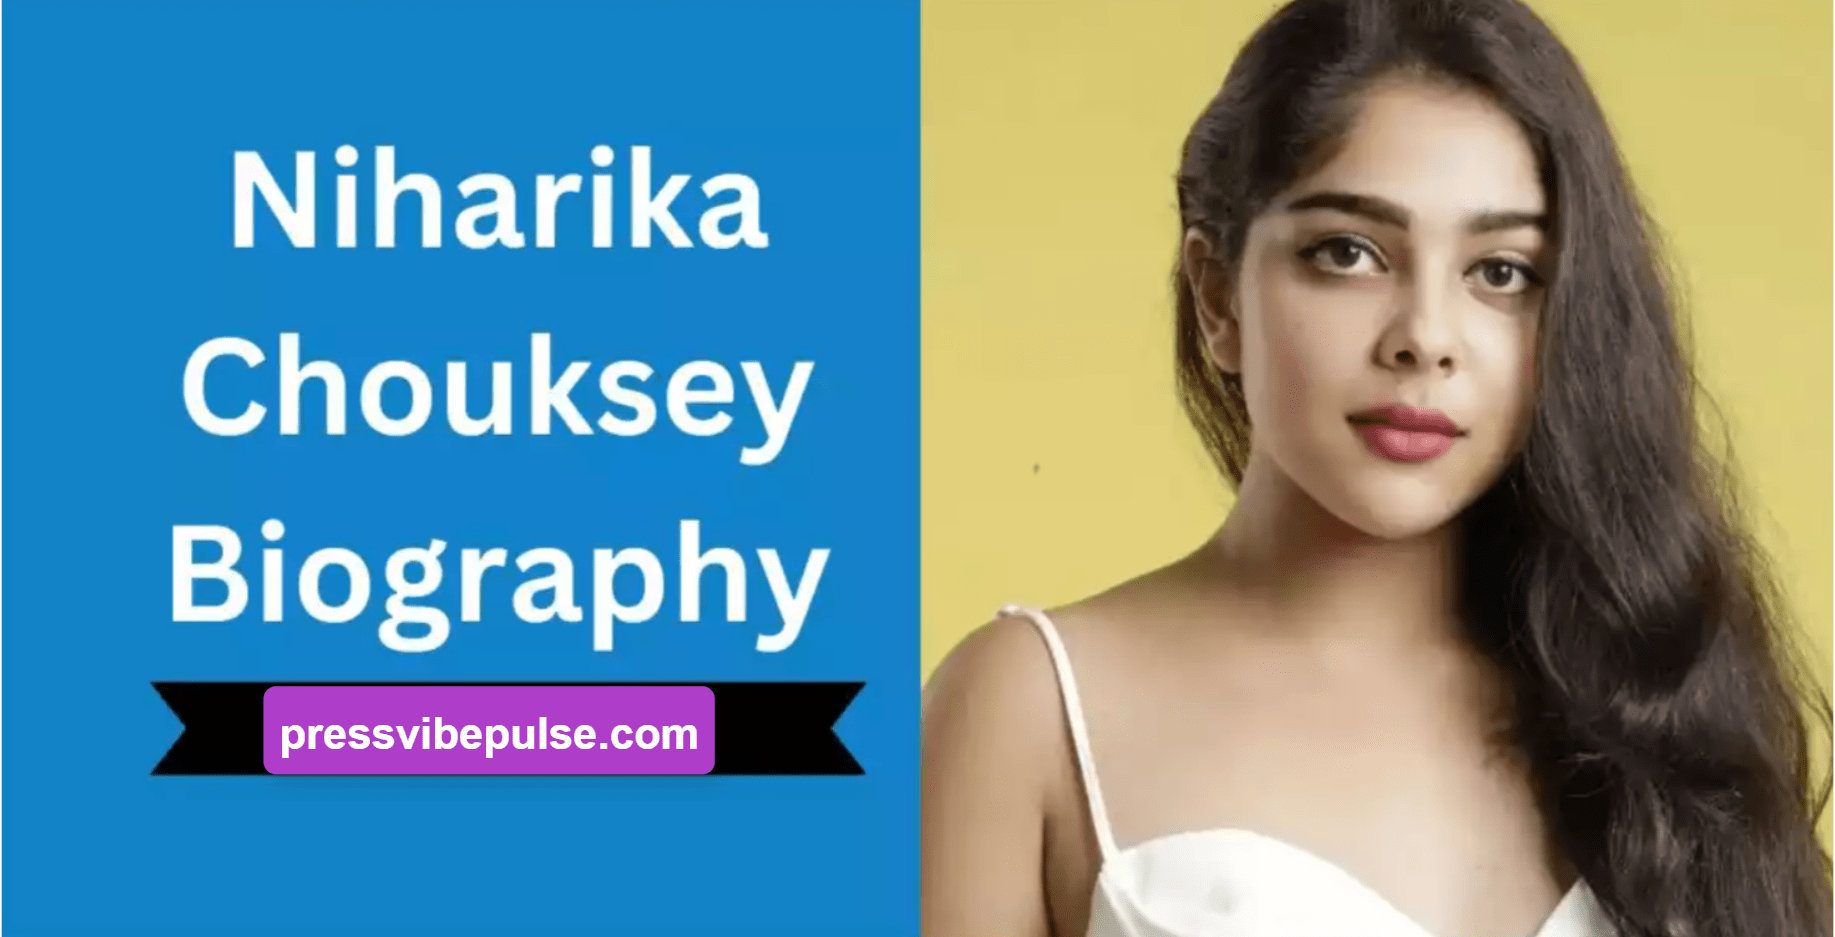 Niharika Chouksey (Actress) Biography : Height, Weight, Age, Career, Affairs & More